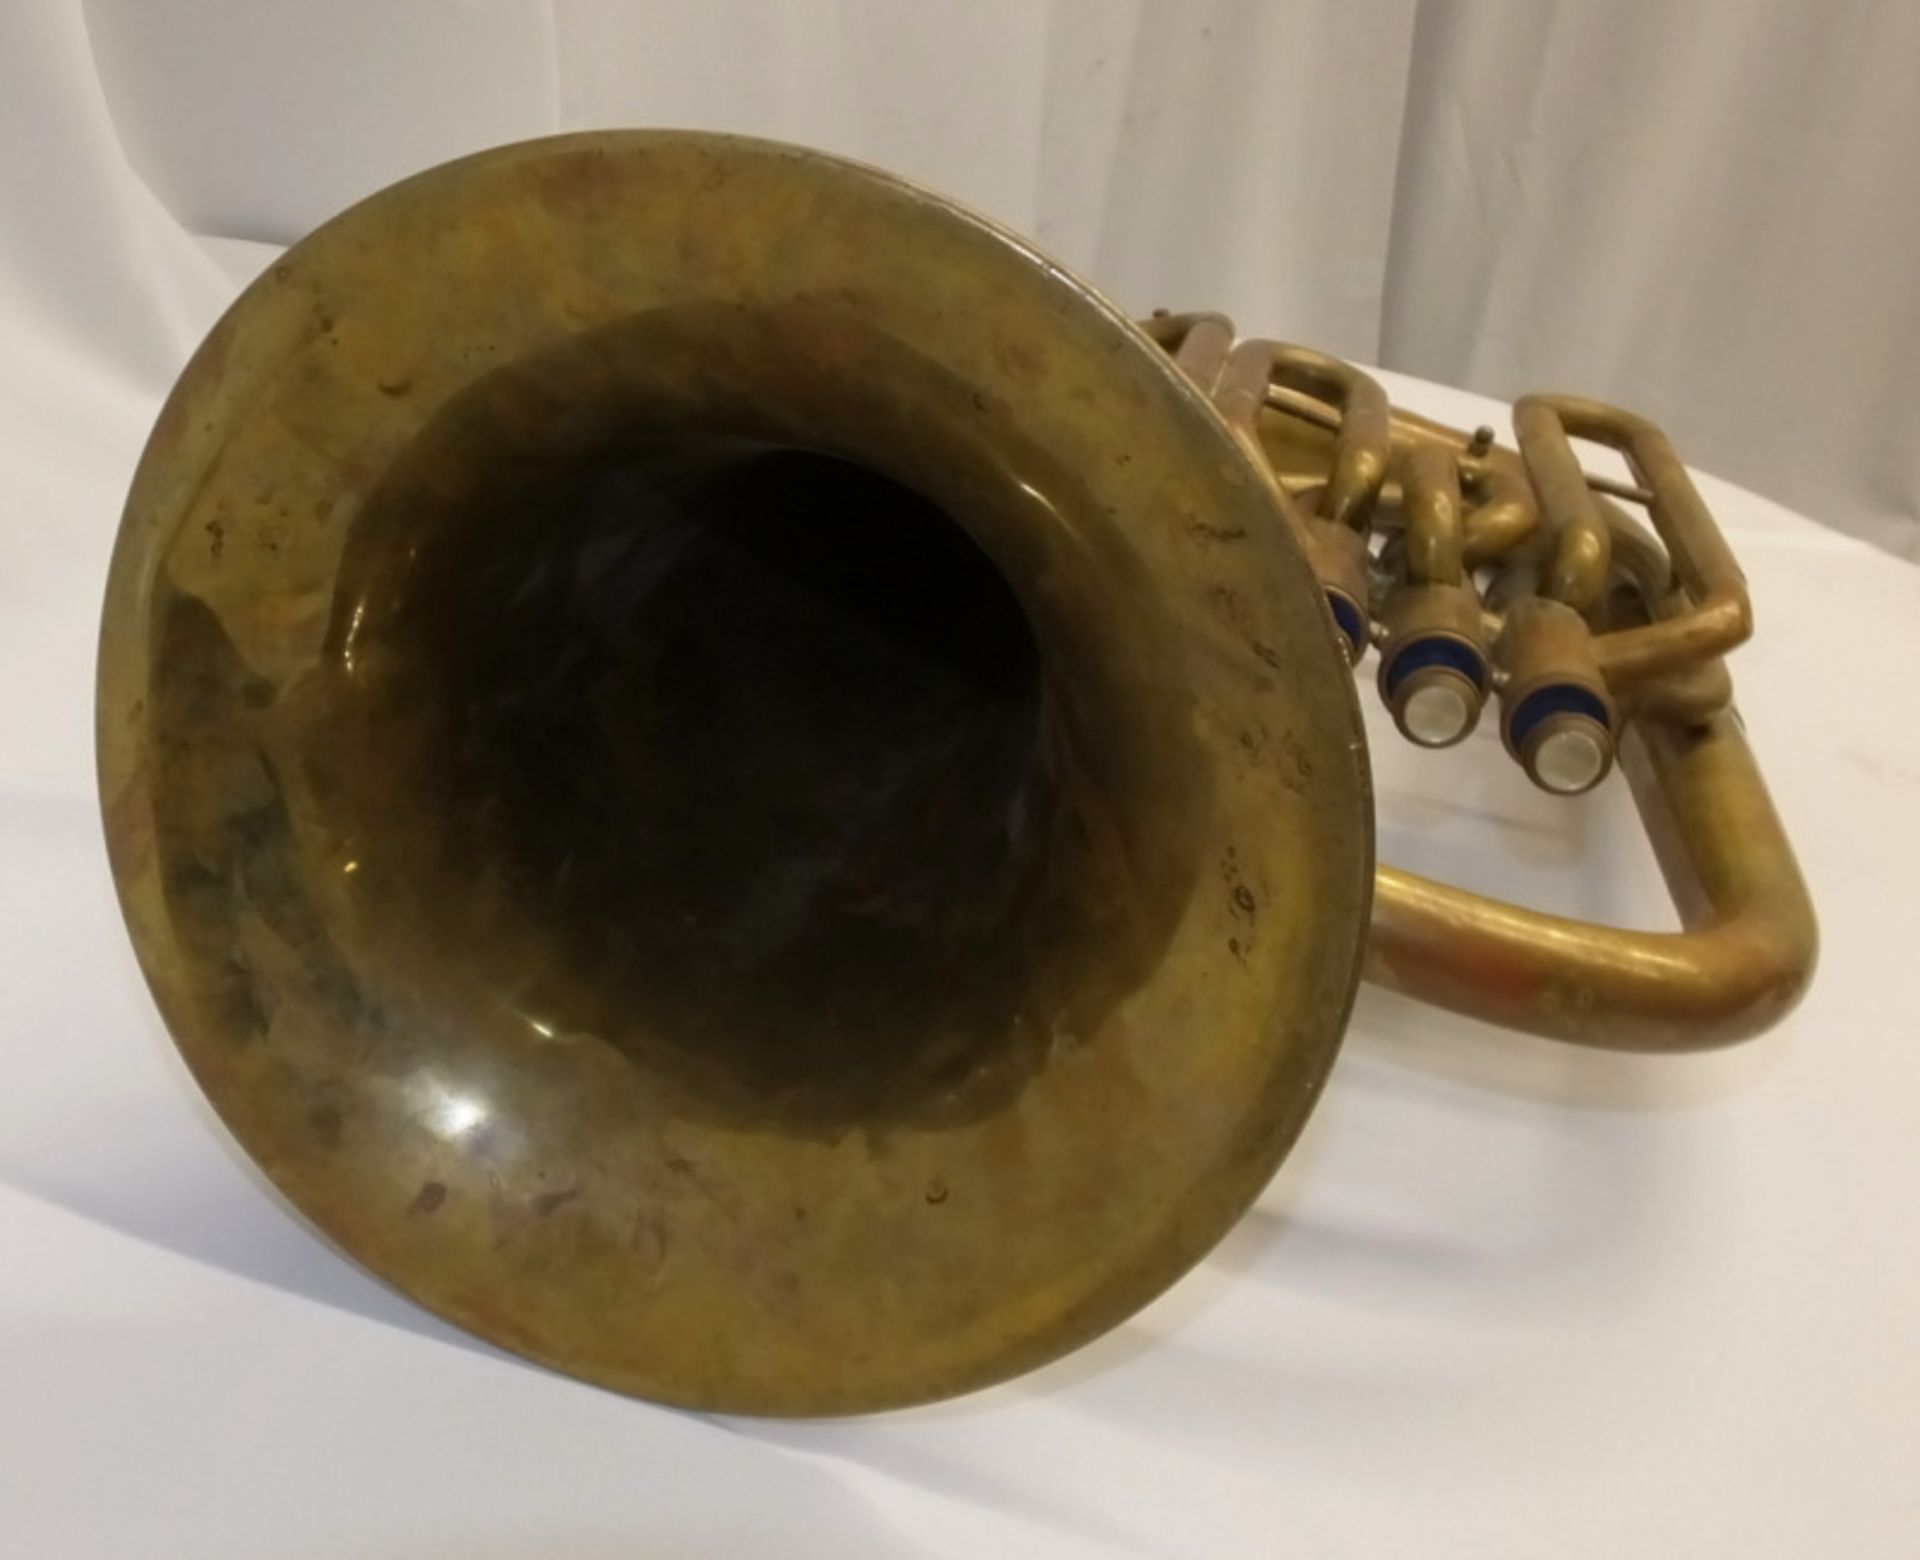 Boosey & Hawkes Lafleur Euphonium - serial number 700401 - Please check photos carefully - Image 5 of 12